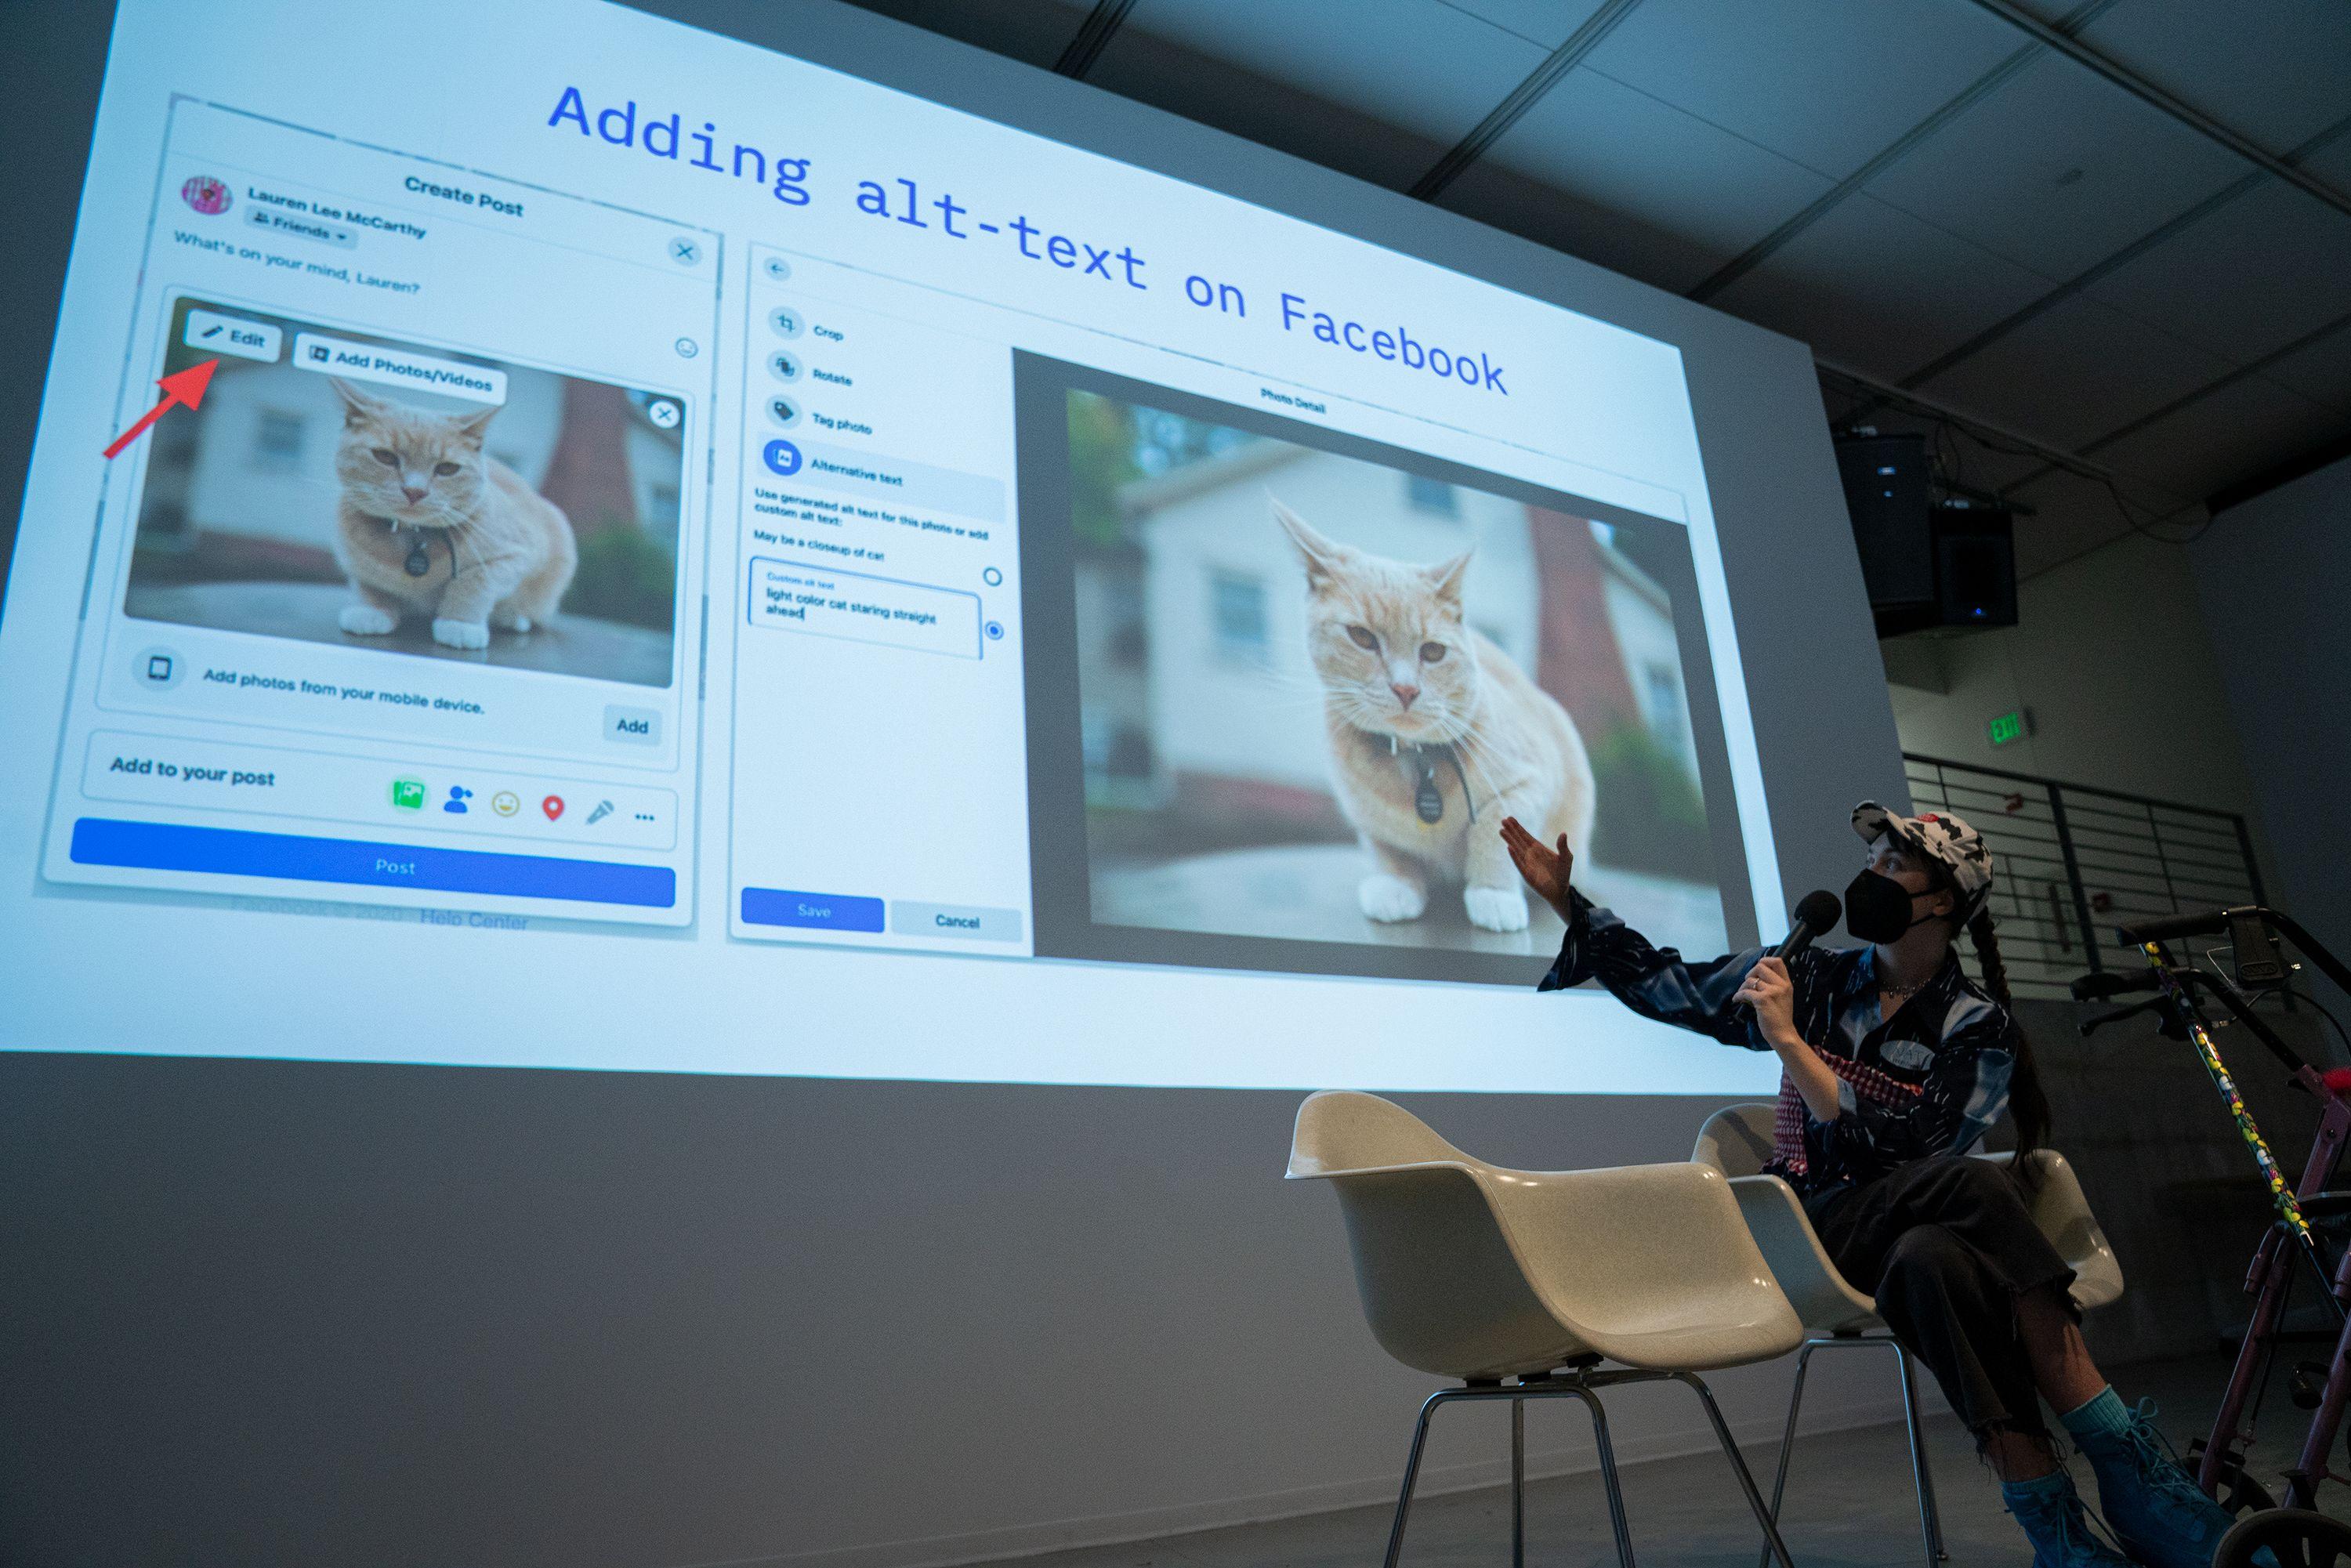 a seated person with microphone gestures toward projection with info about adding alt-text on facebook